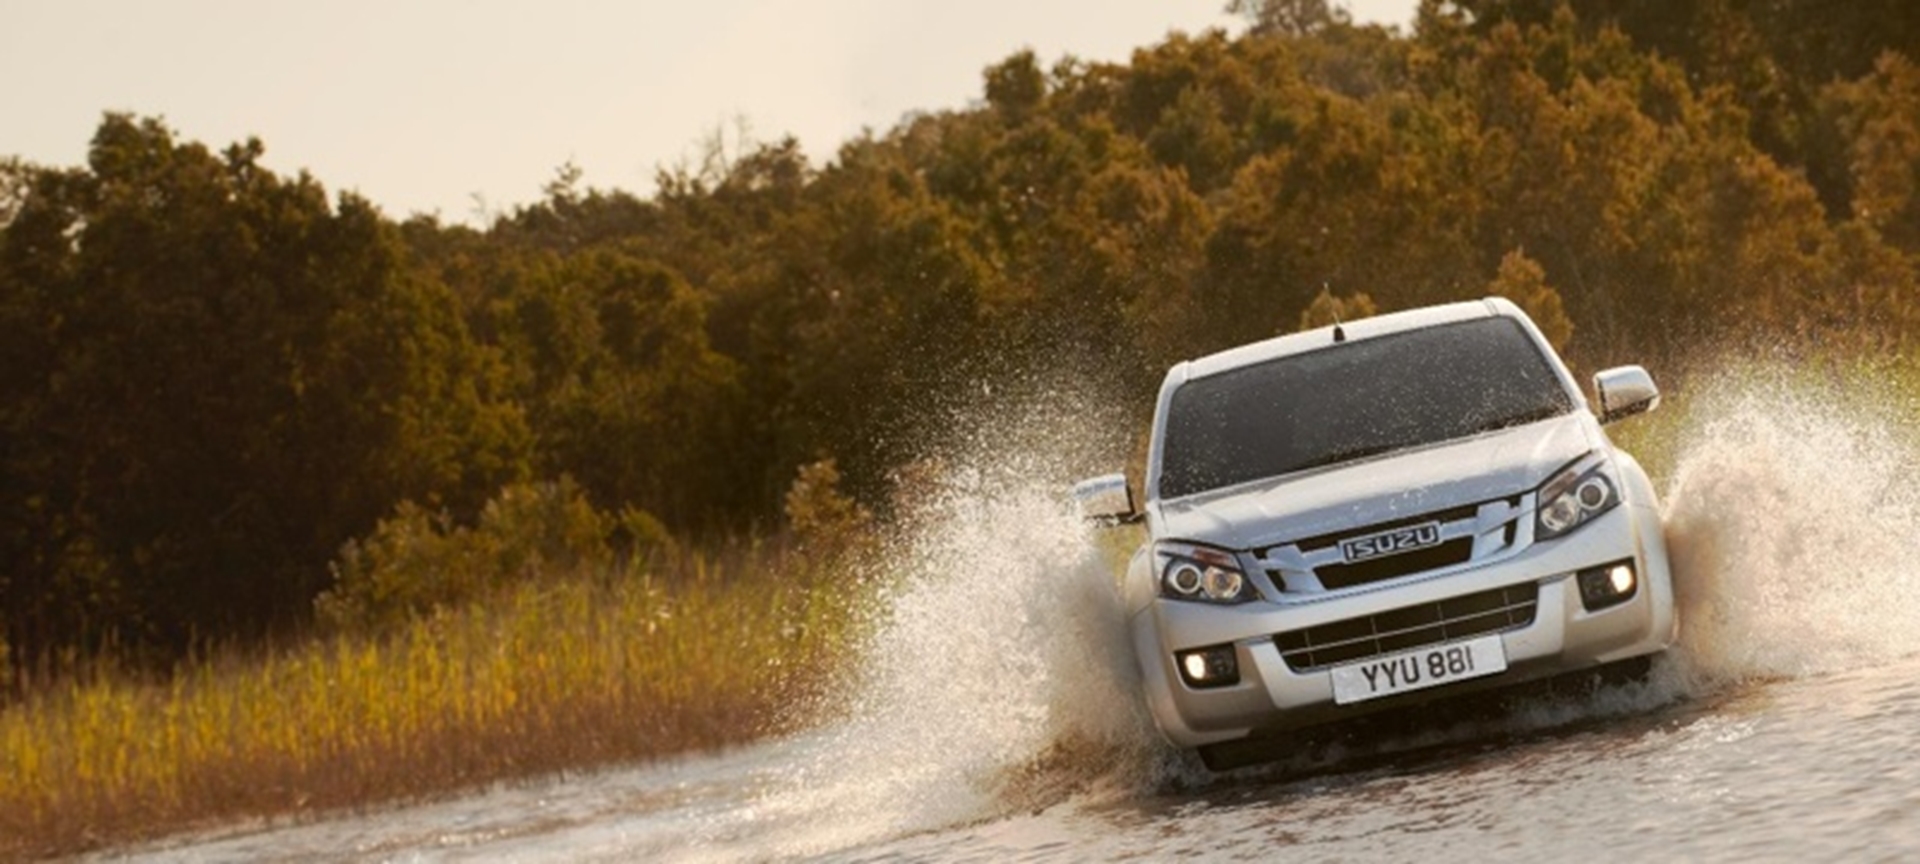 CLASS-LEADING RESIDUAL VALUES FOR ALL-NEW ISUZU D-MAX